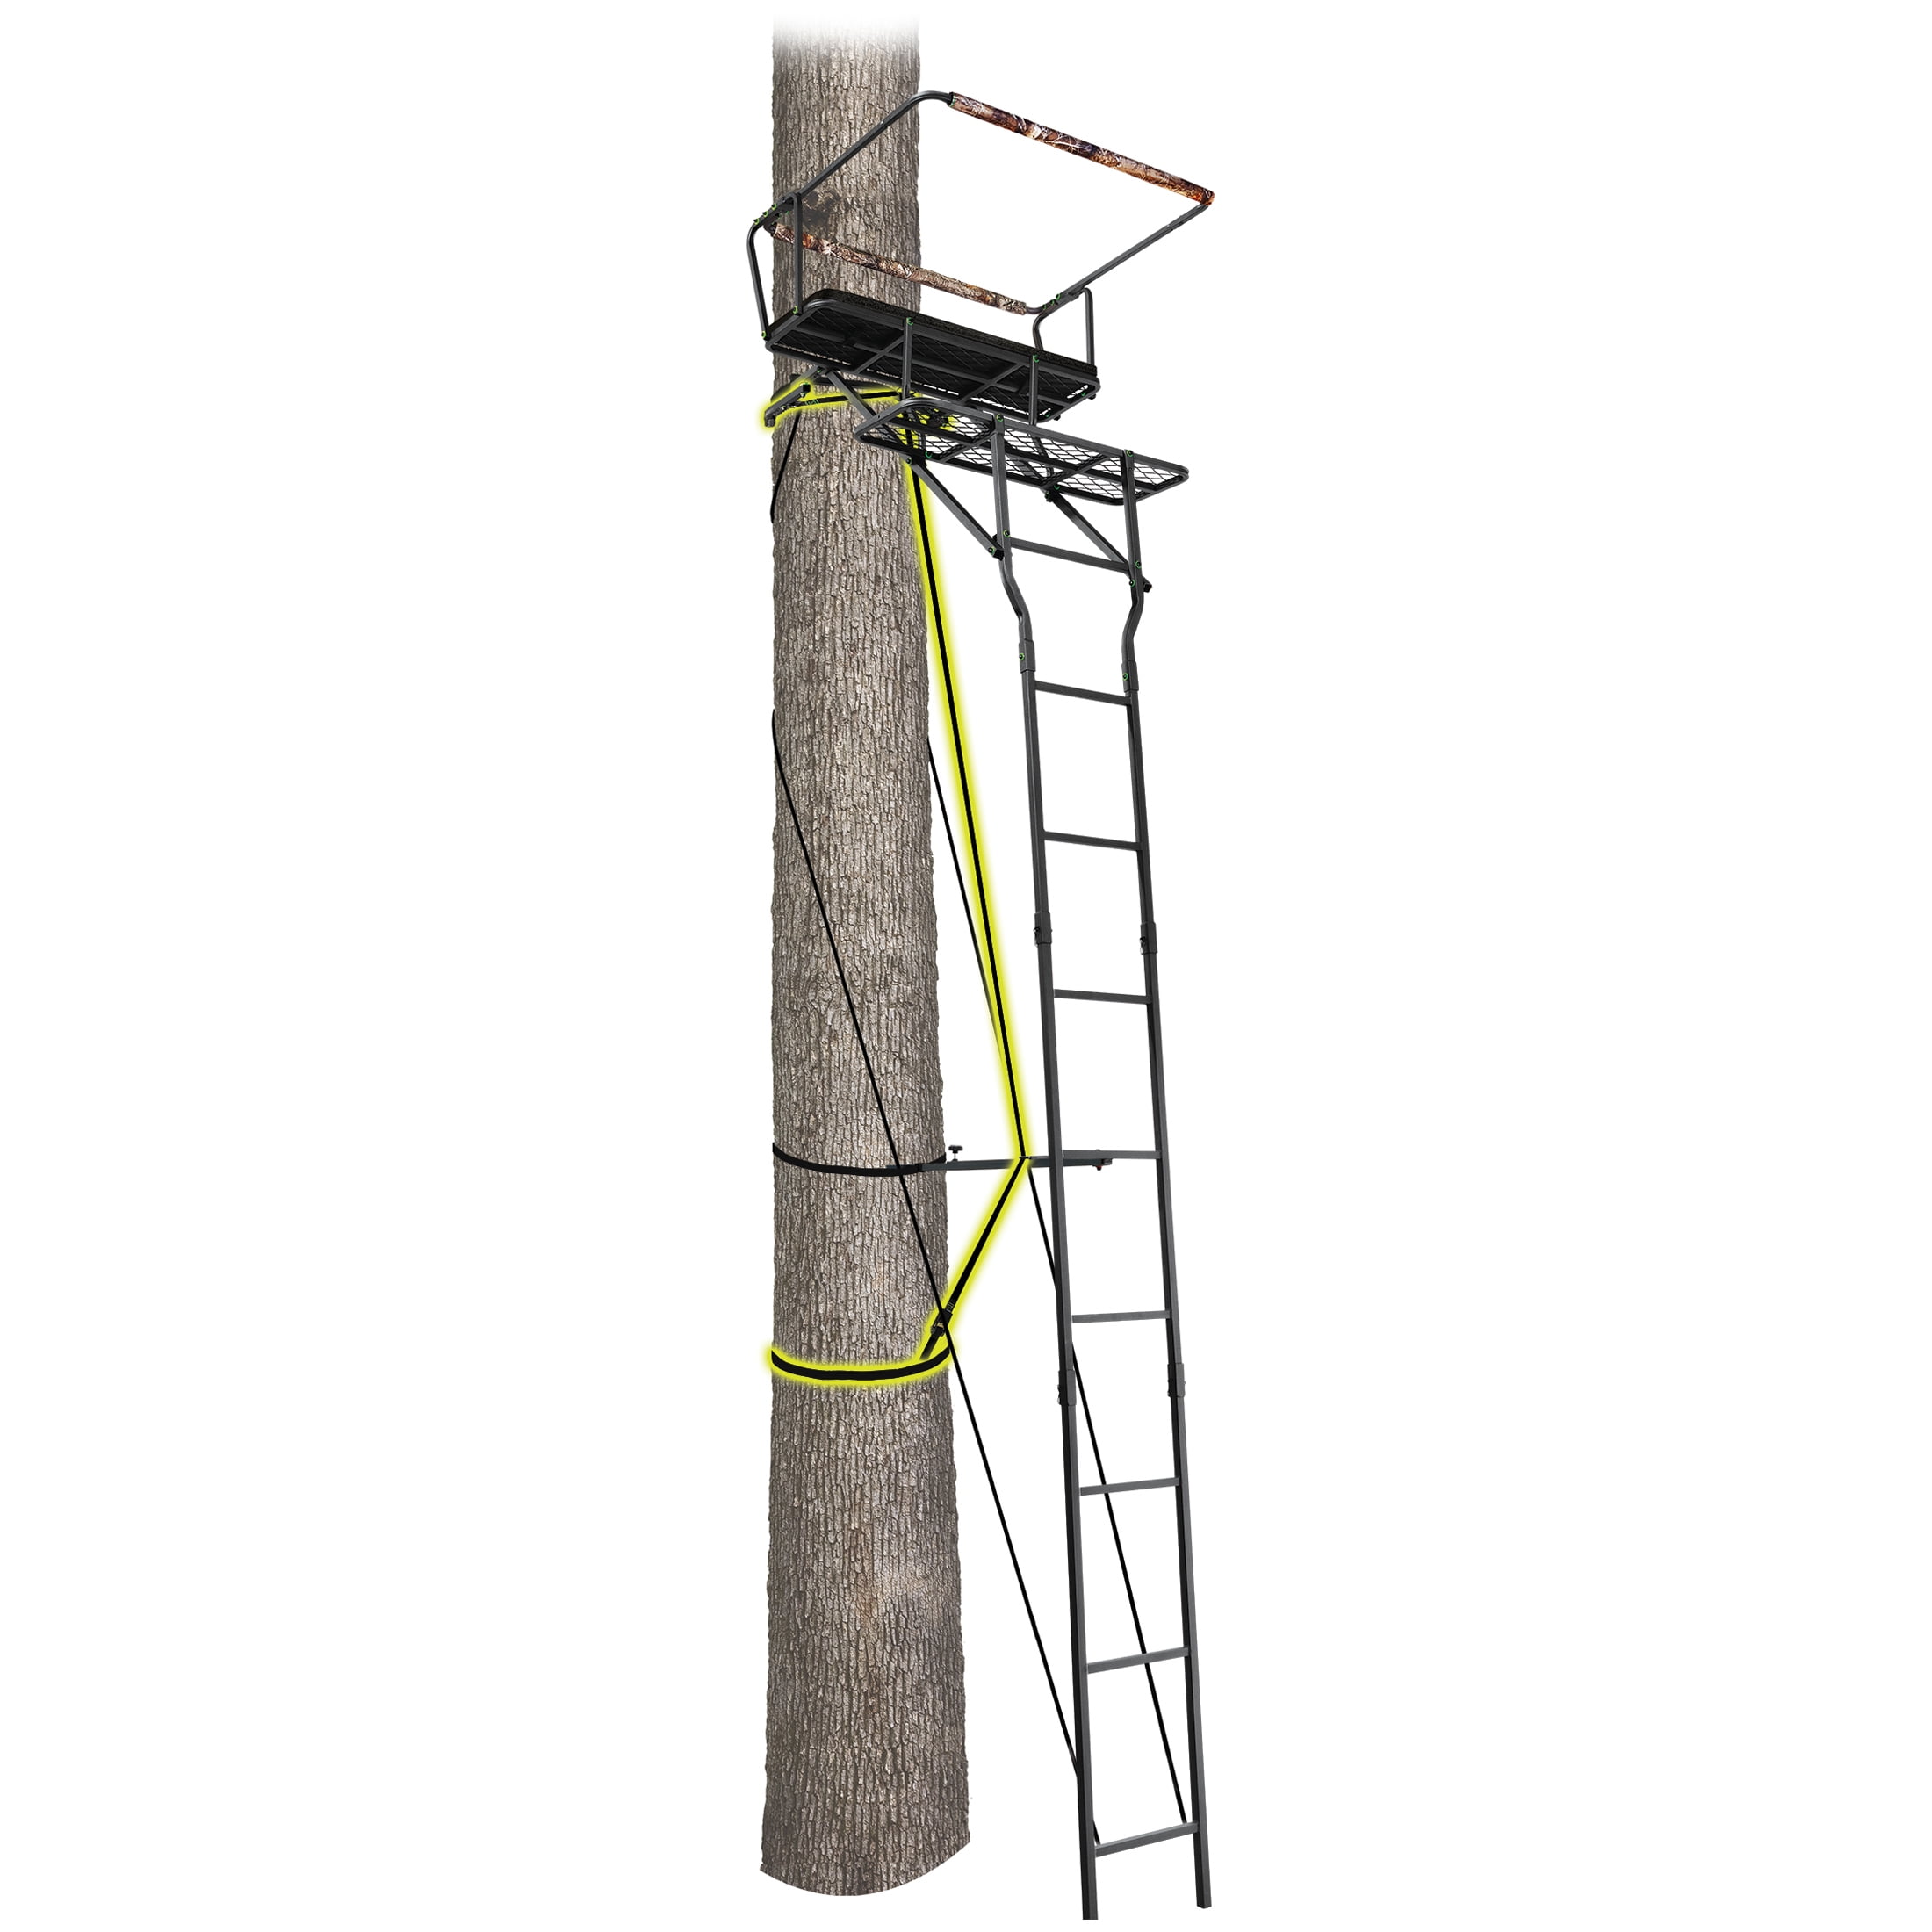 Ladder Tree Stand 2 Man 15' Archery Hunting Camping Shooting Safety Harness New 